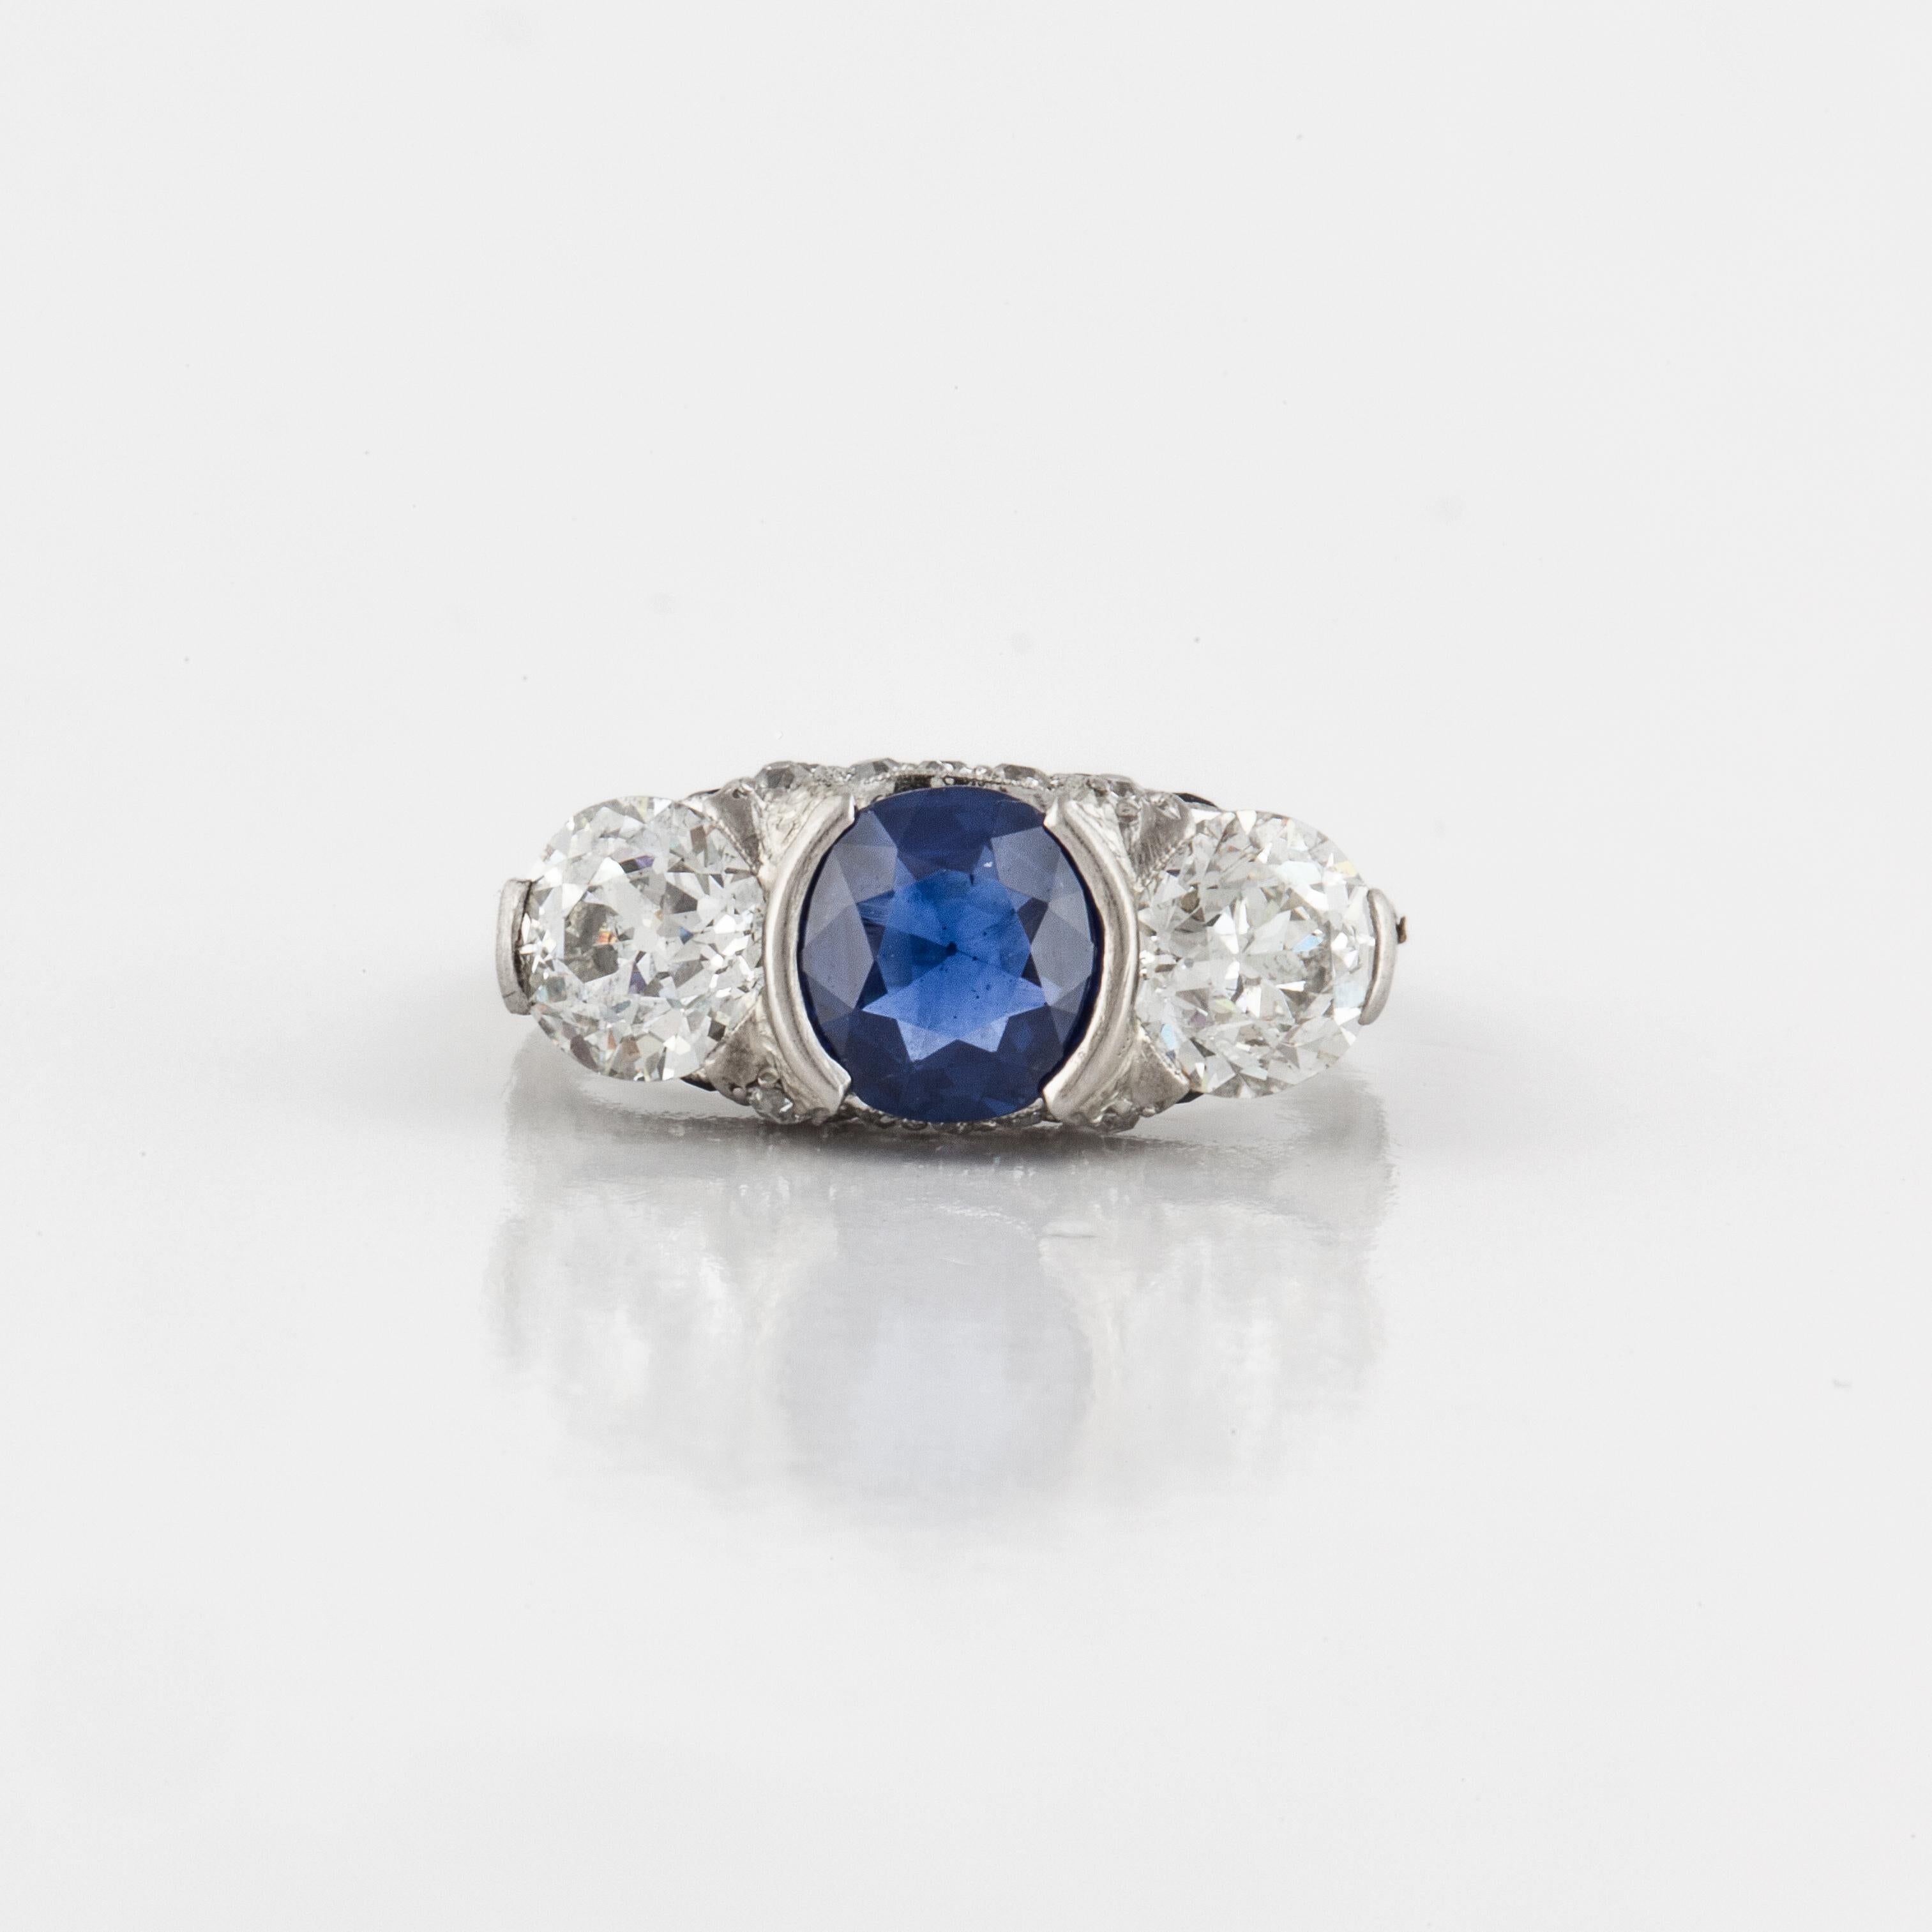 Art Deco three-stone ring in platinum with diamonds and a sapphire. There is one round sapphire weighing 1.18 carats, natural, no heat, Cambodian (Pailin), with an AGL Certificate.  The two side diamonds are old European cuts totaling 1.25 carats;